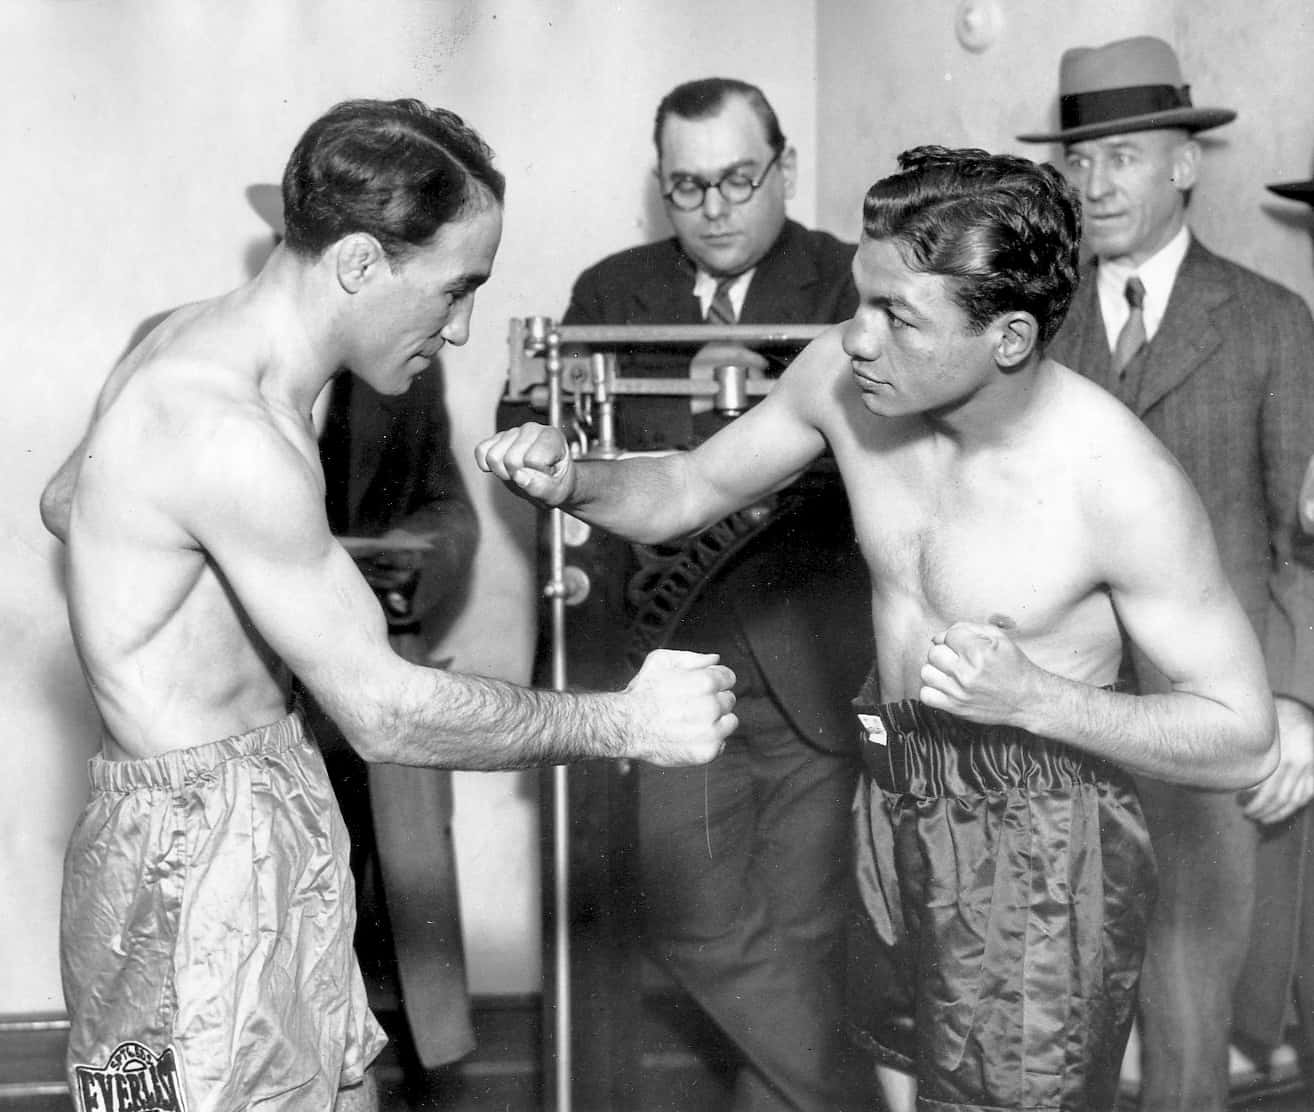 Tony Canzoneri Vs. Johnny Dundee Weigh-in Wallpaper